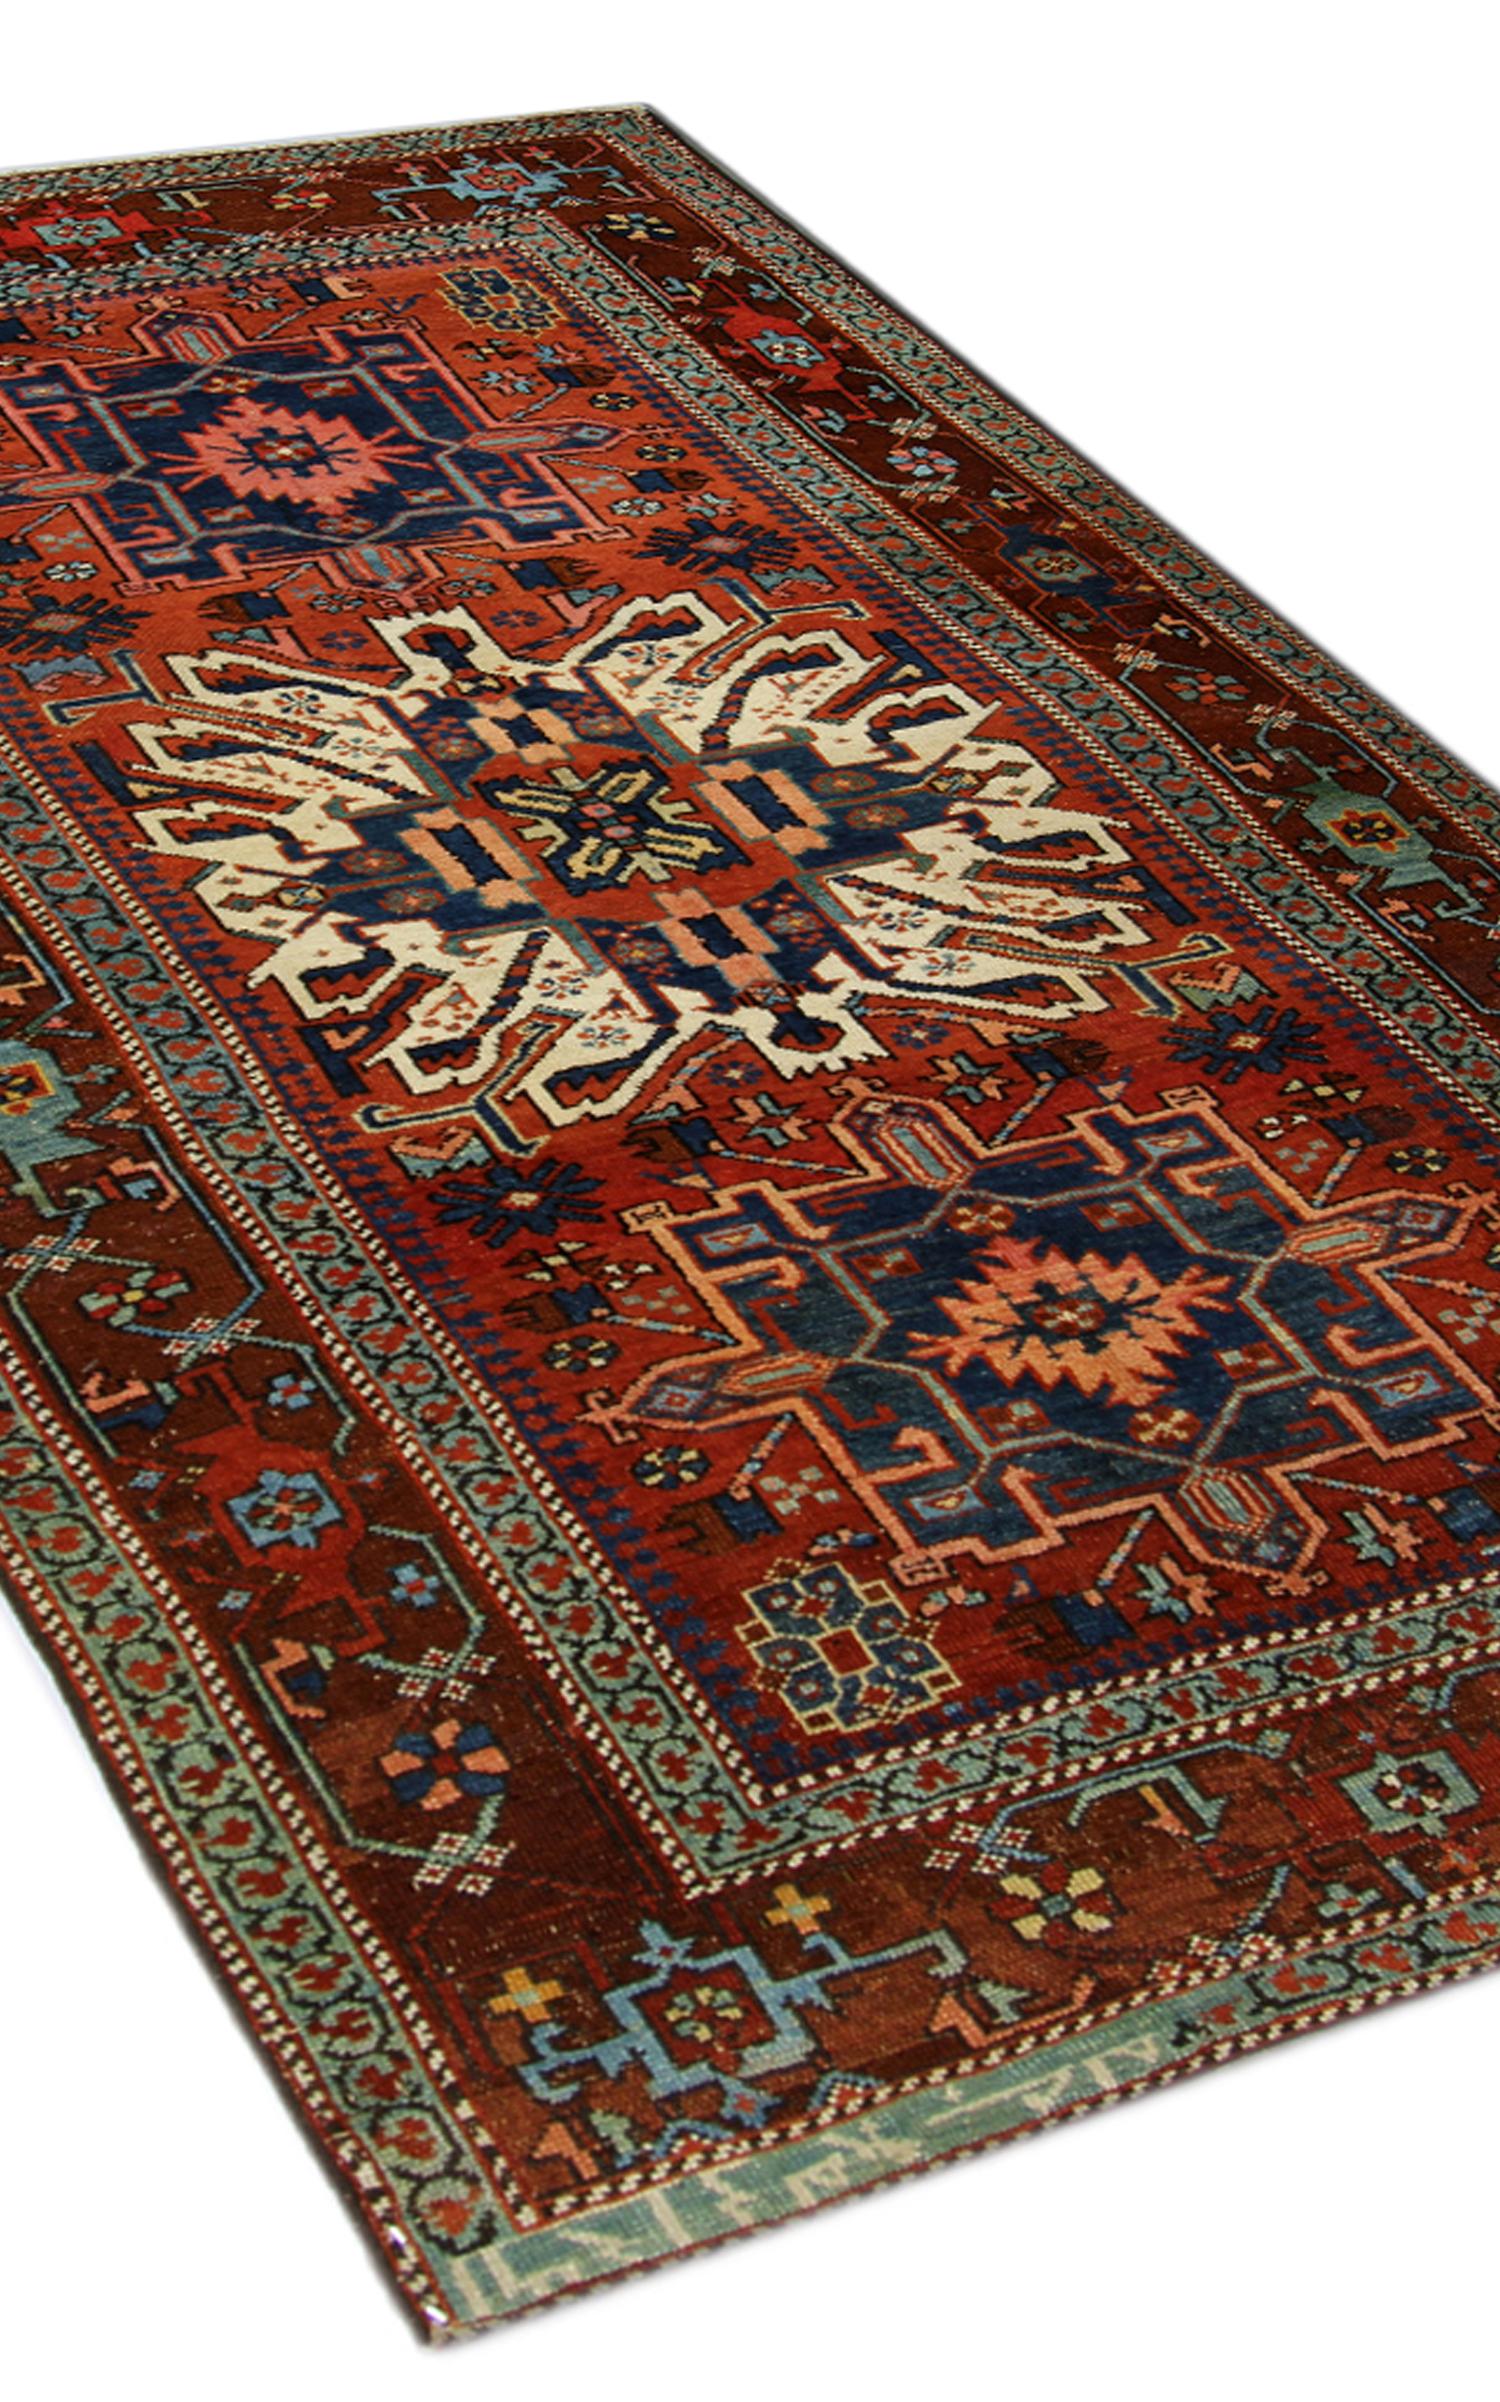 This beautiful wool rug is a fine example of a carpets from the 1890s. The design features three medallions woven through the centre on a field of orange-brown, the accents have been woven in ivory, blue and orange colours. Both the accents and the